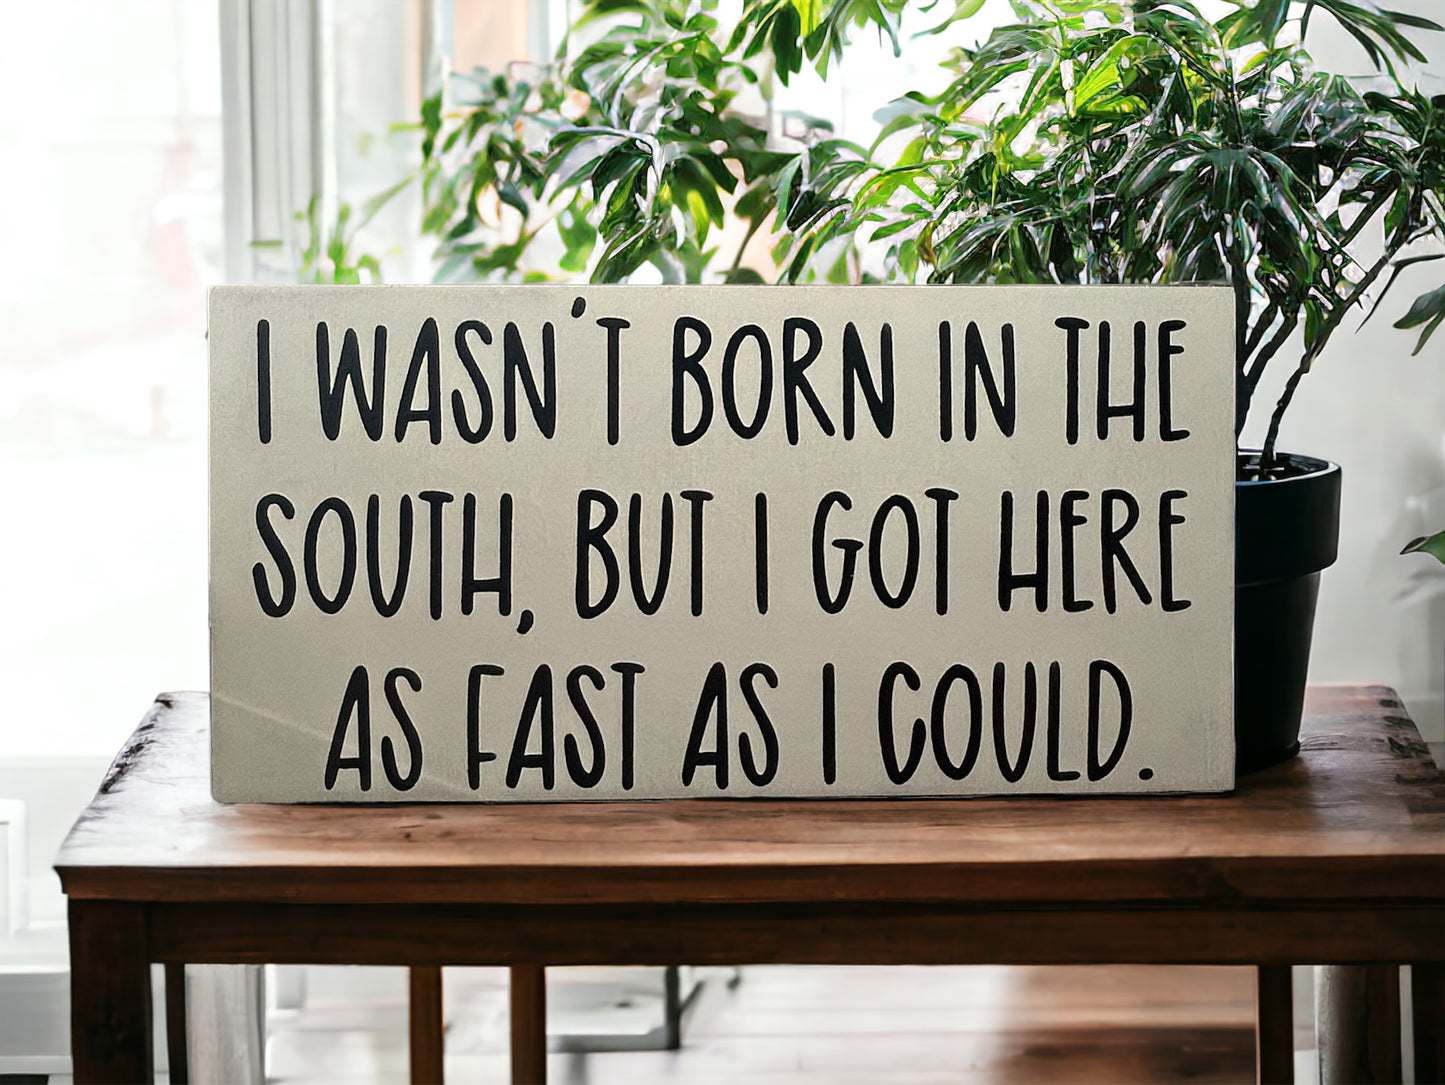 Wasn't Born In The South - Funny Rustic Wood White Sign